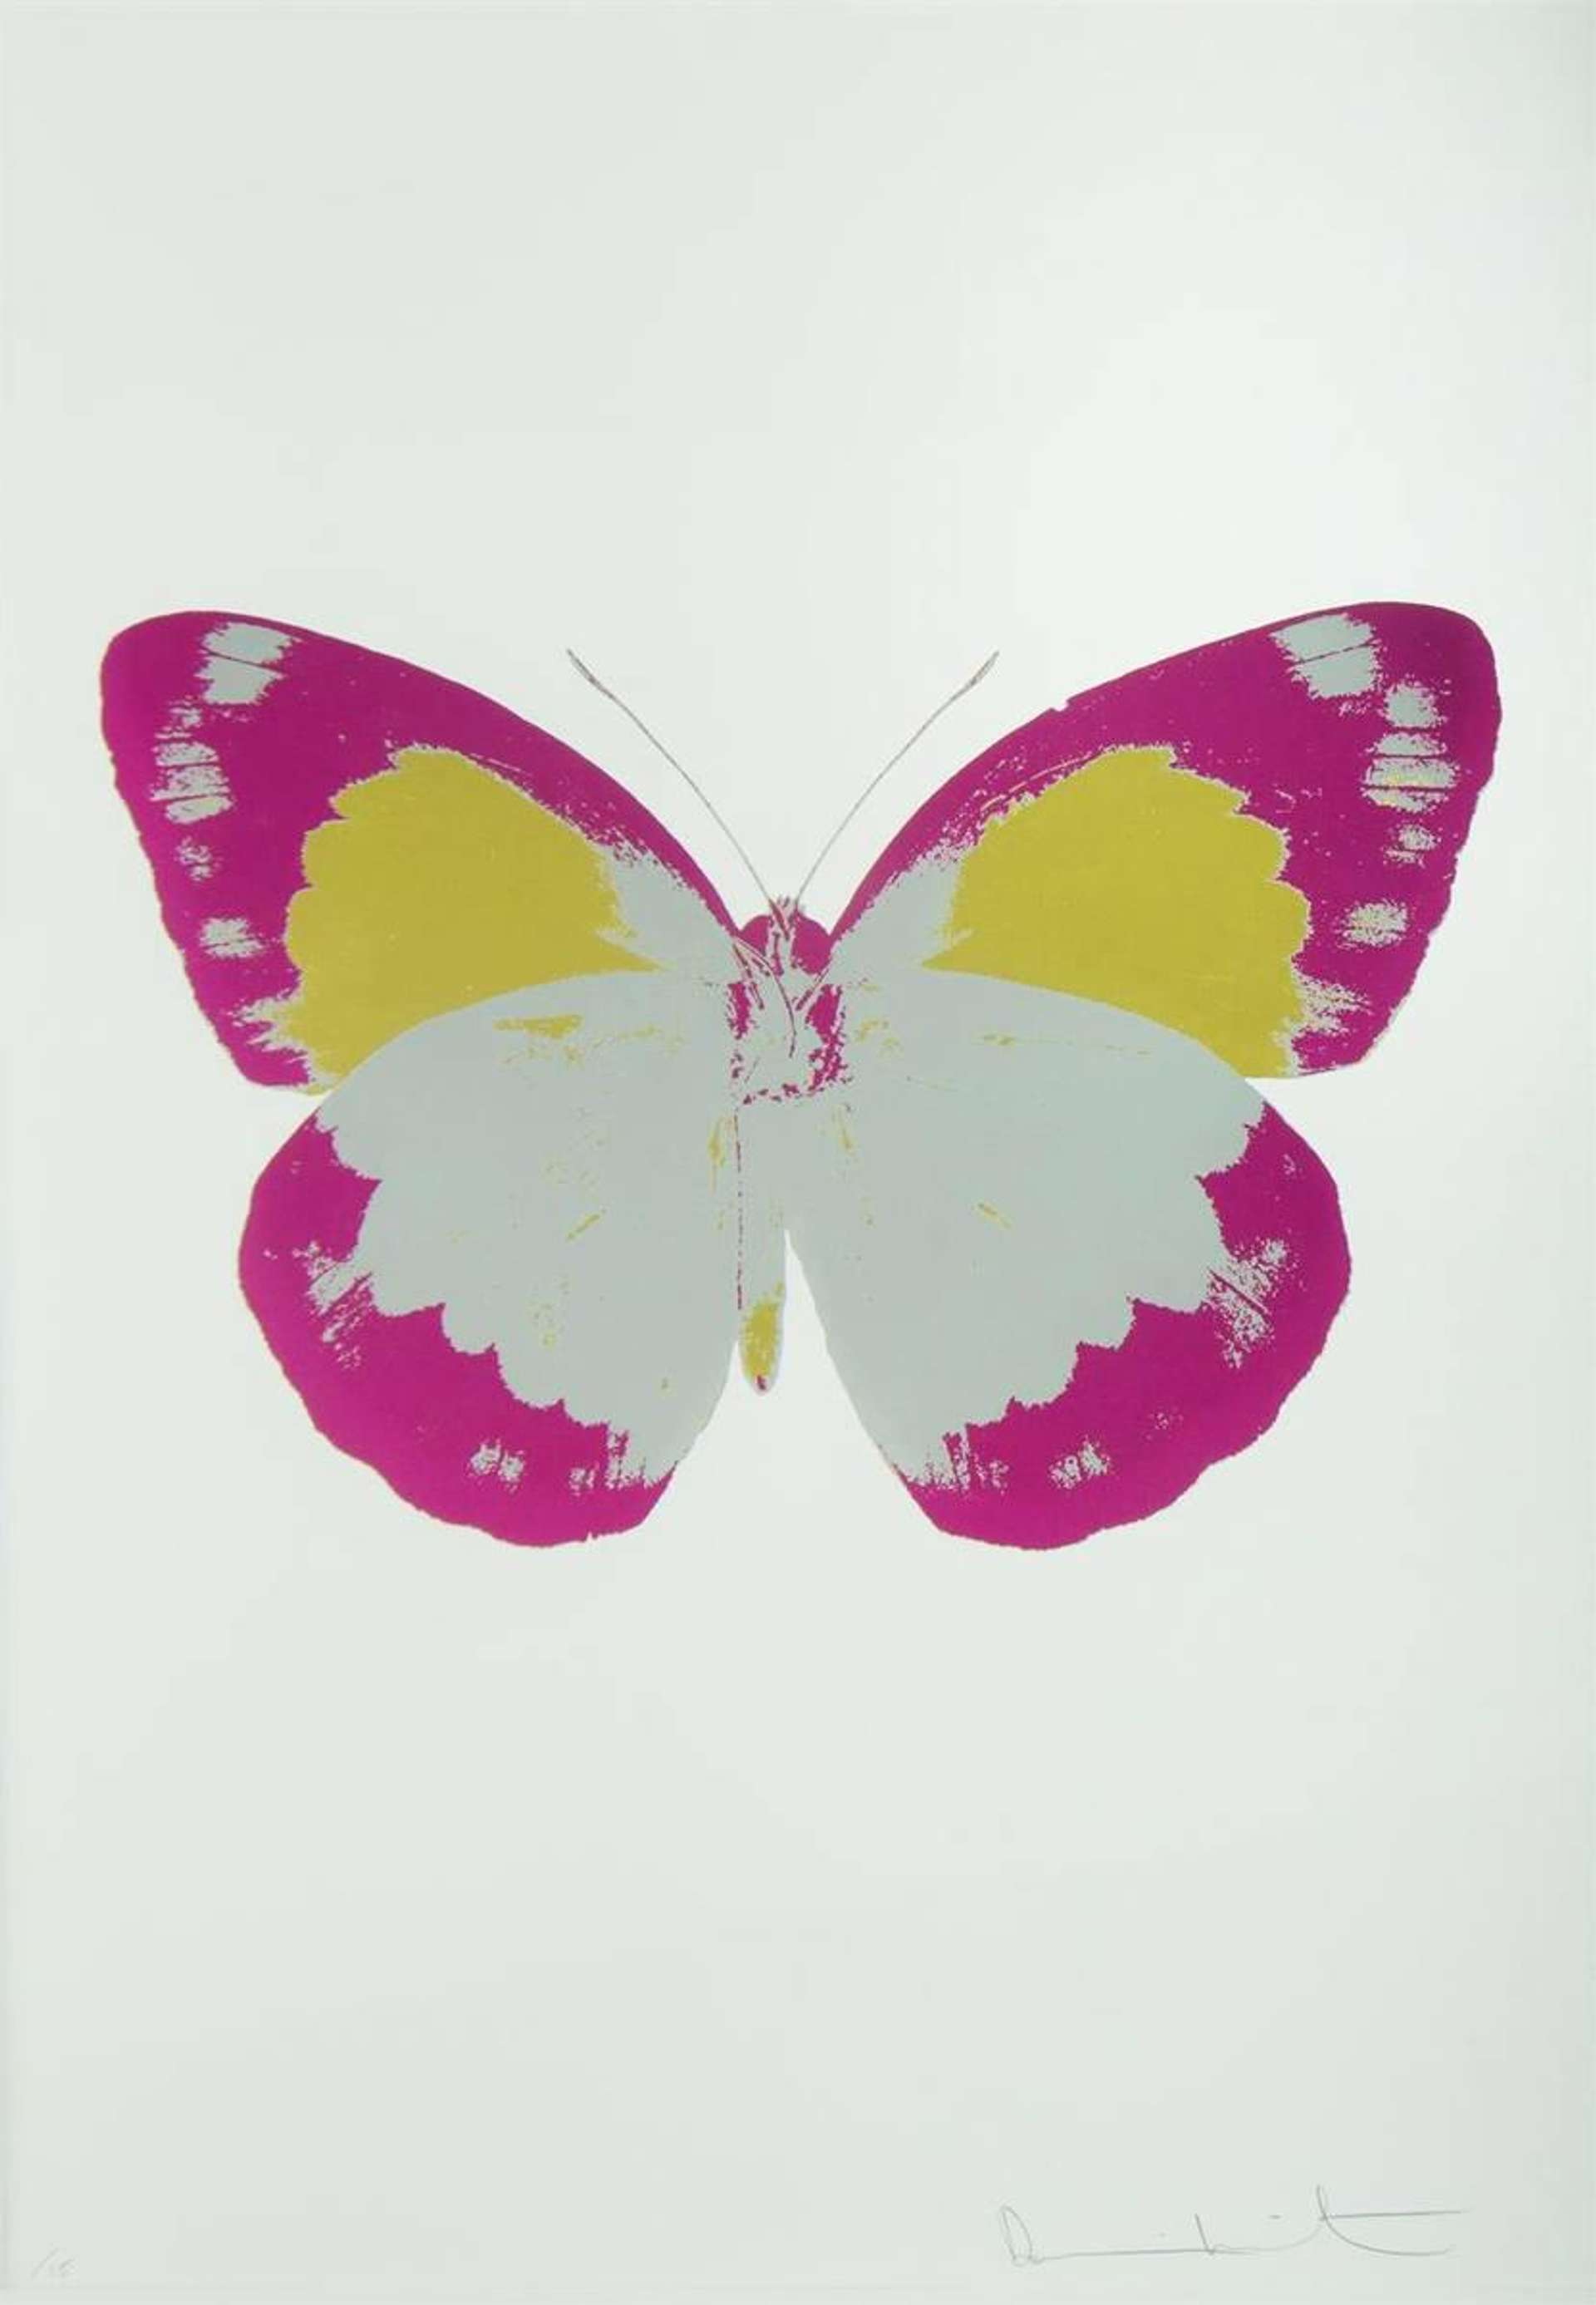 Damien Hirst: The Souls II (silver gloss, fuchsia pink, oriental gold) - Signed Print